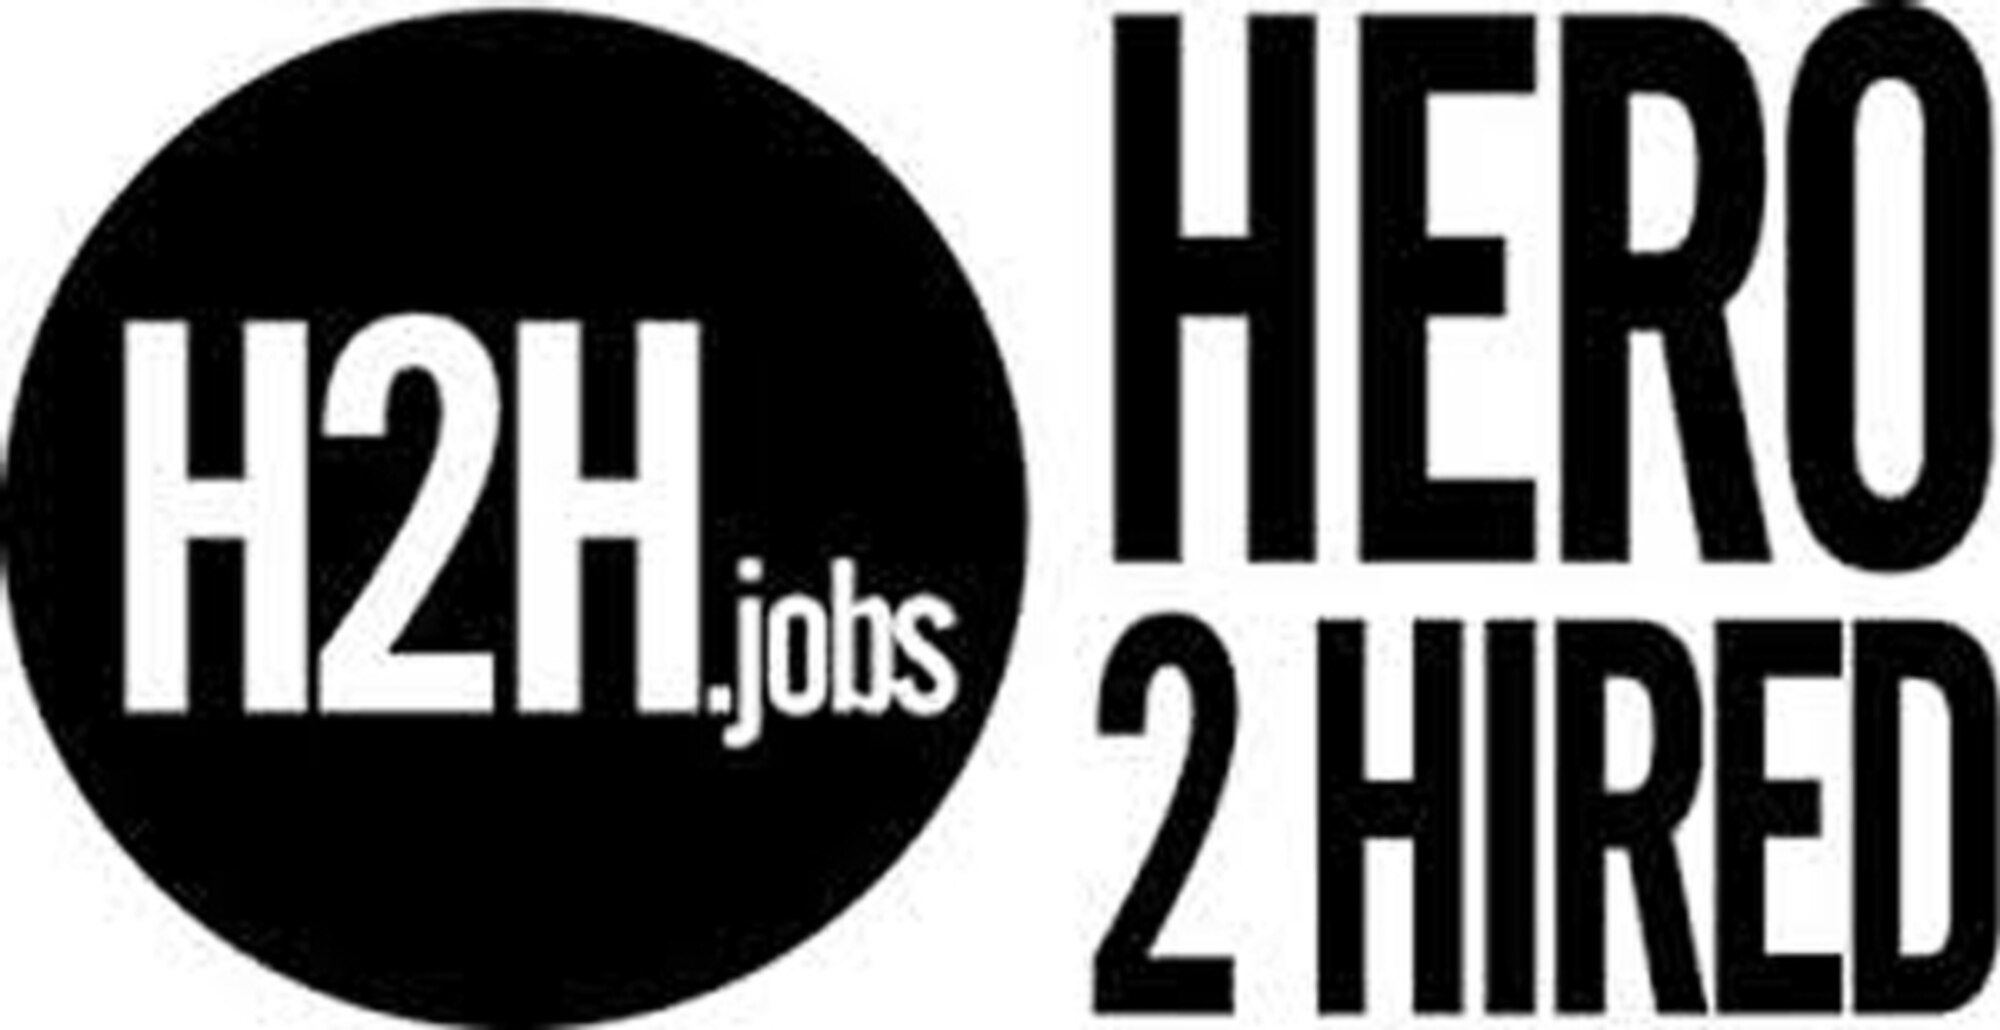 Hero 2 Hired is a major sponsor of a series of job fairs this winter that promises to help Guardsmen and reserve military members and their spouses as well as veterans and retirees attain their employment goals.